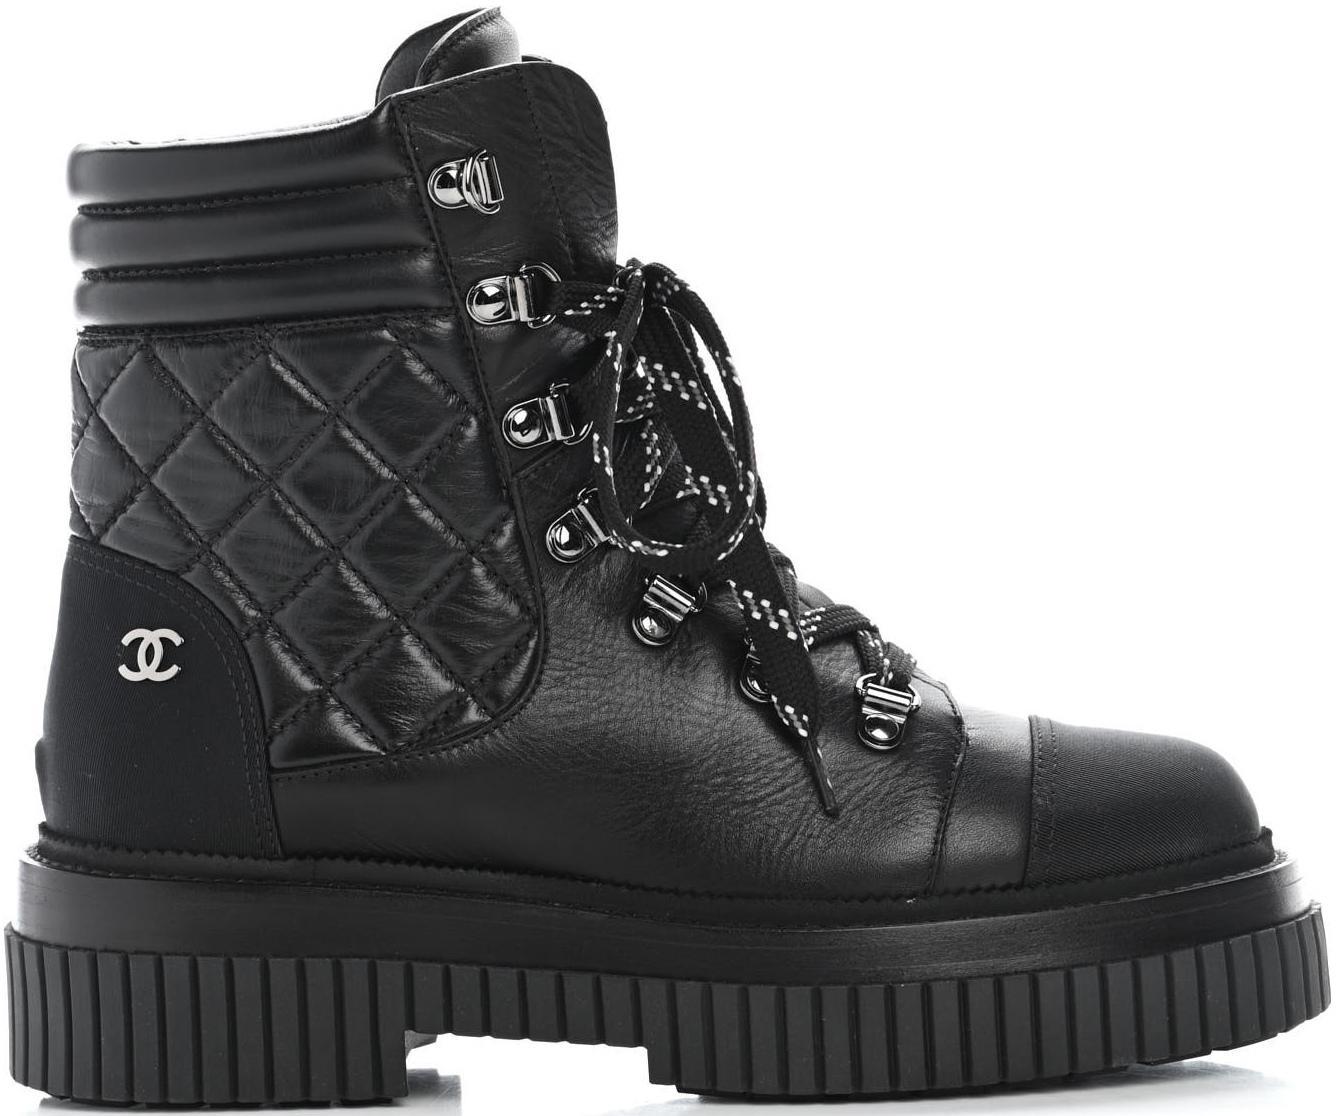 Grosgrain Quilted Boots (Black) - KristinDaily.org